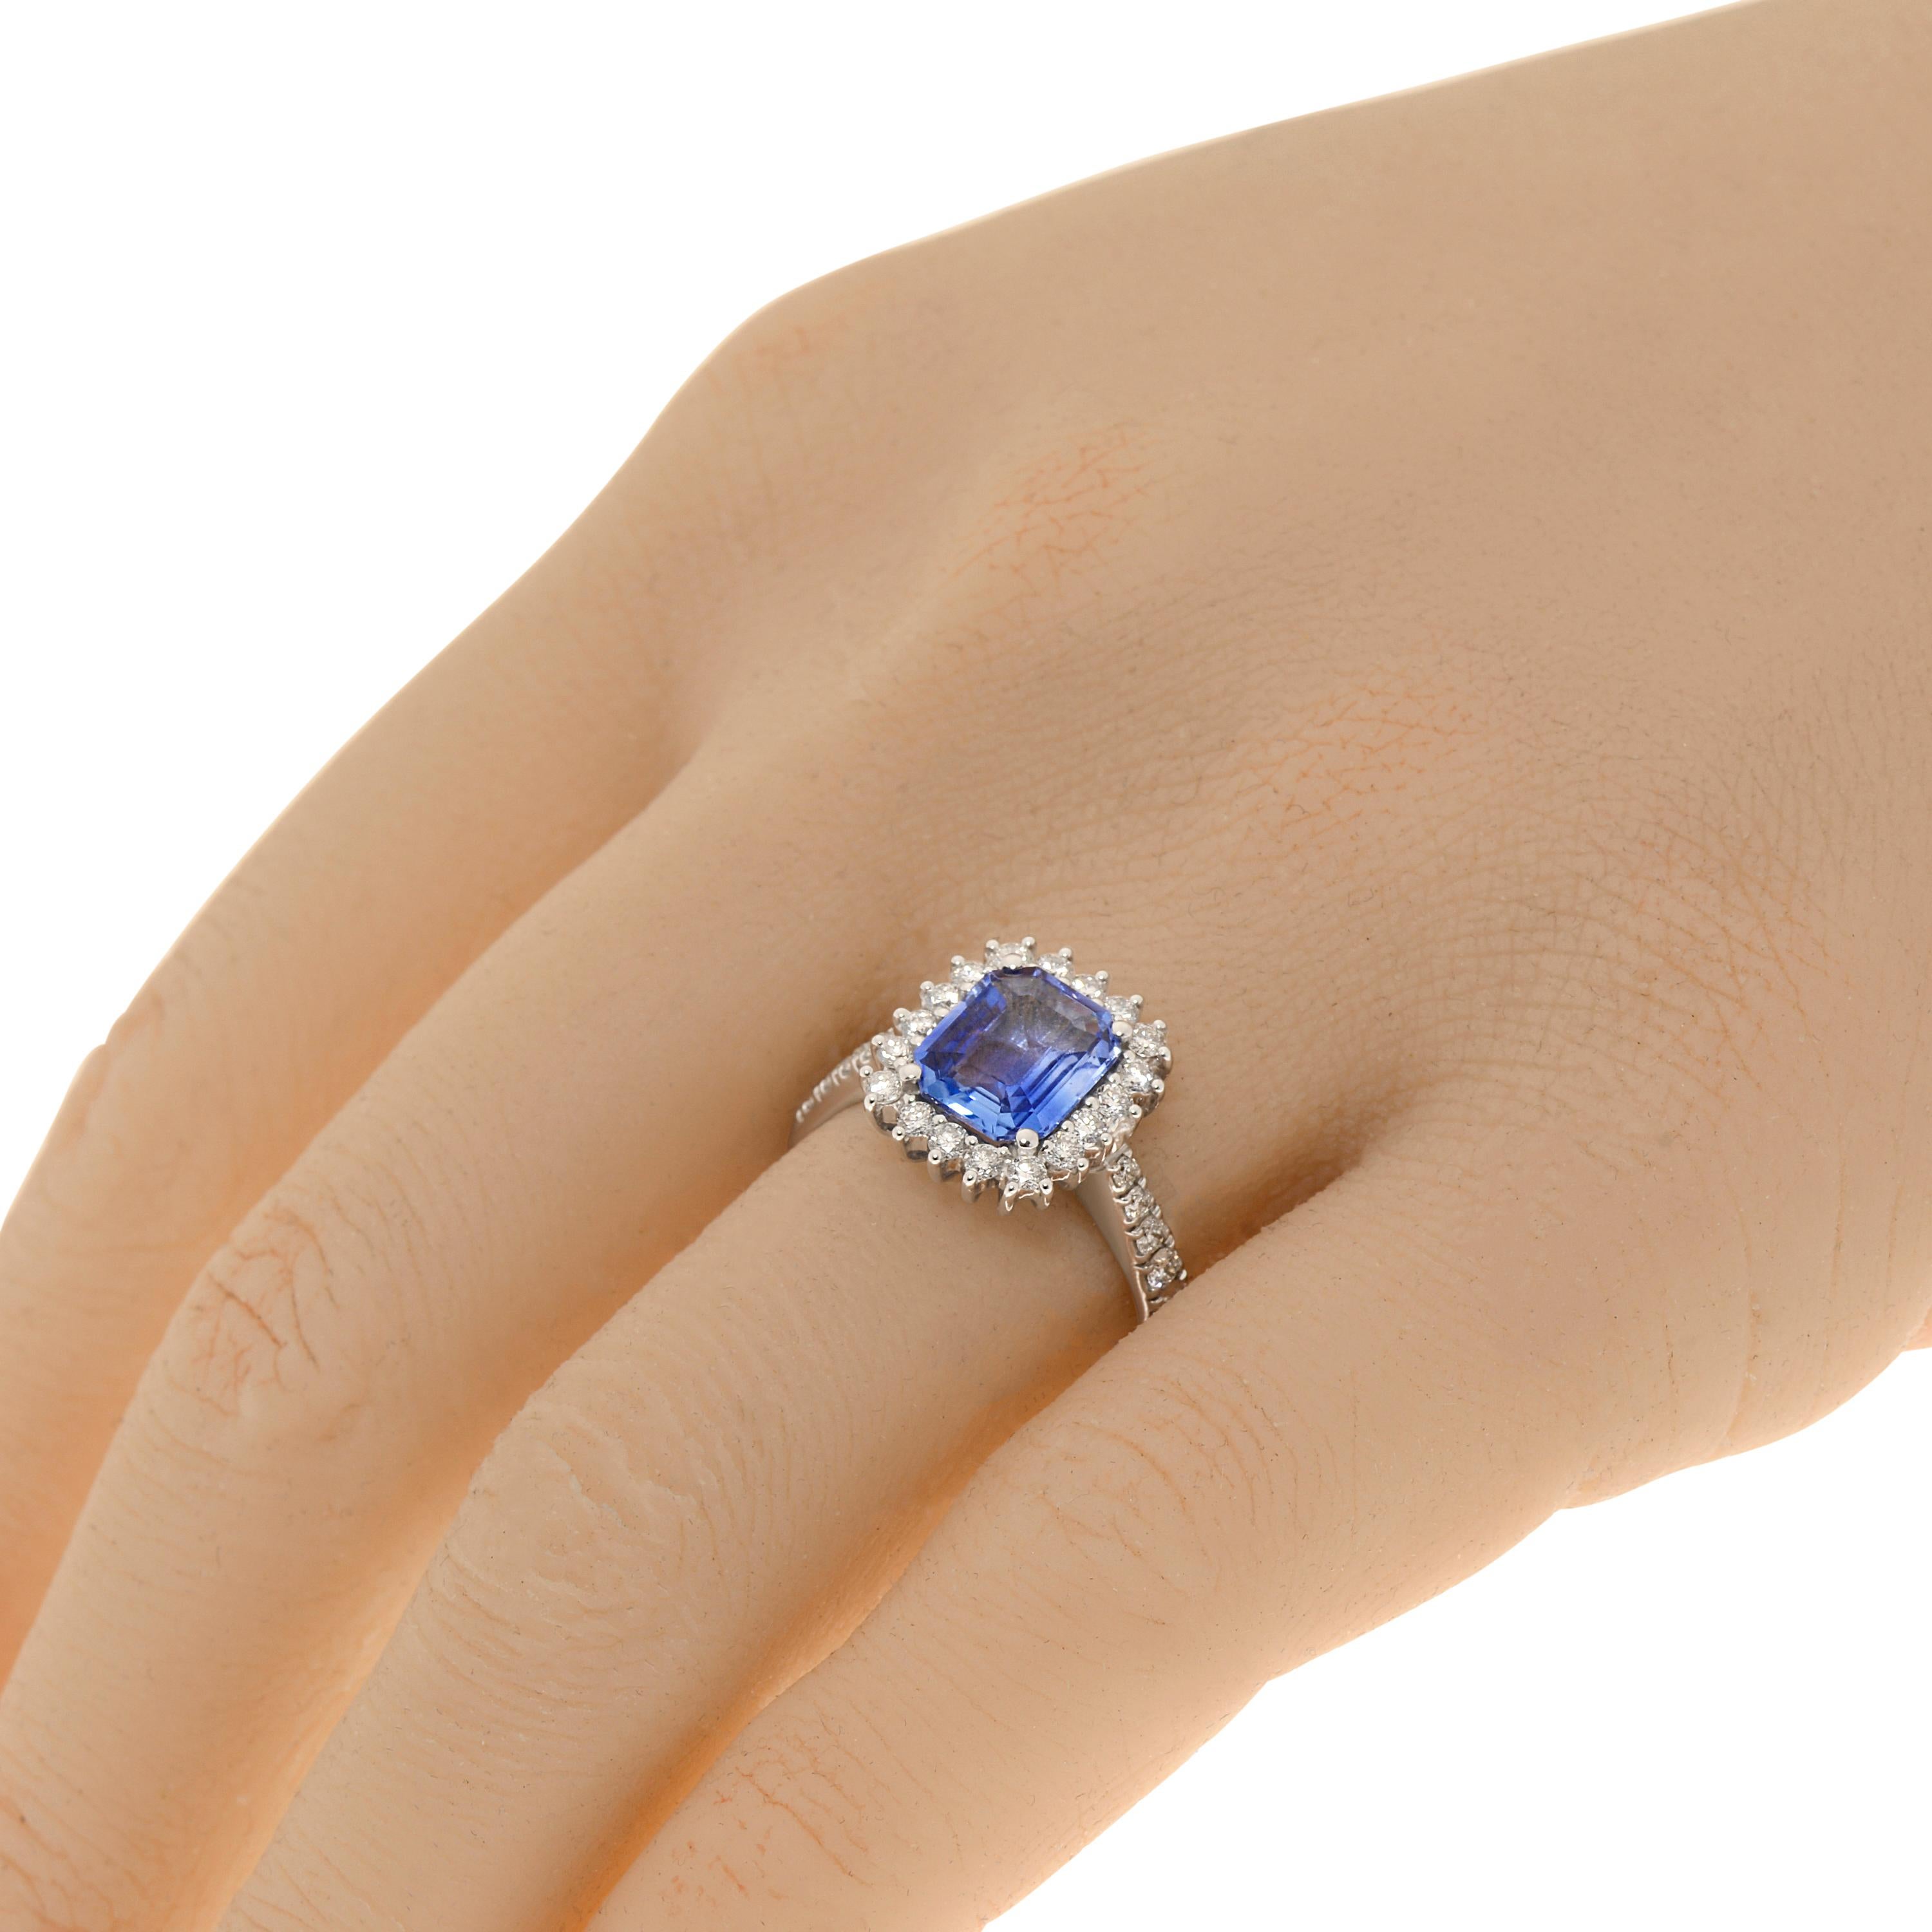 Zydo 18K white gold gemstone ring features a 2.34ct. tw. blue sapphire center with 0.65ct. tw. diamond halo. The ring size is 7 (54.4). The ring measuremnts are 1/2